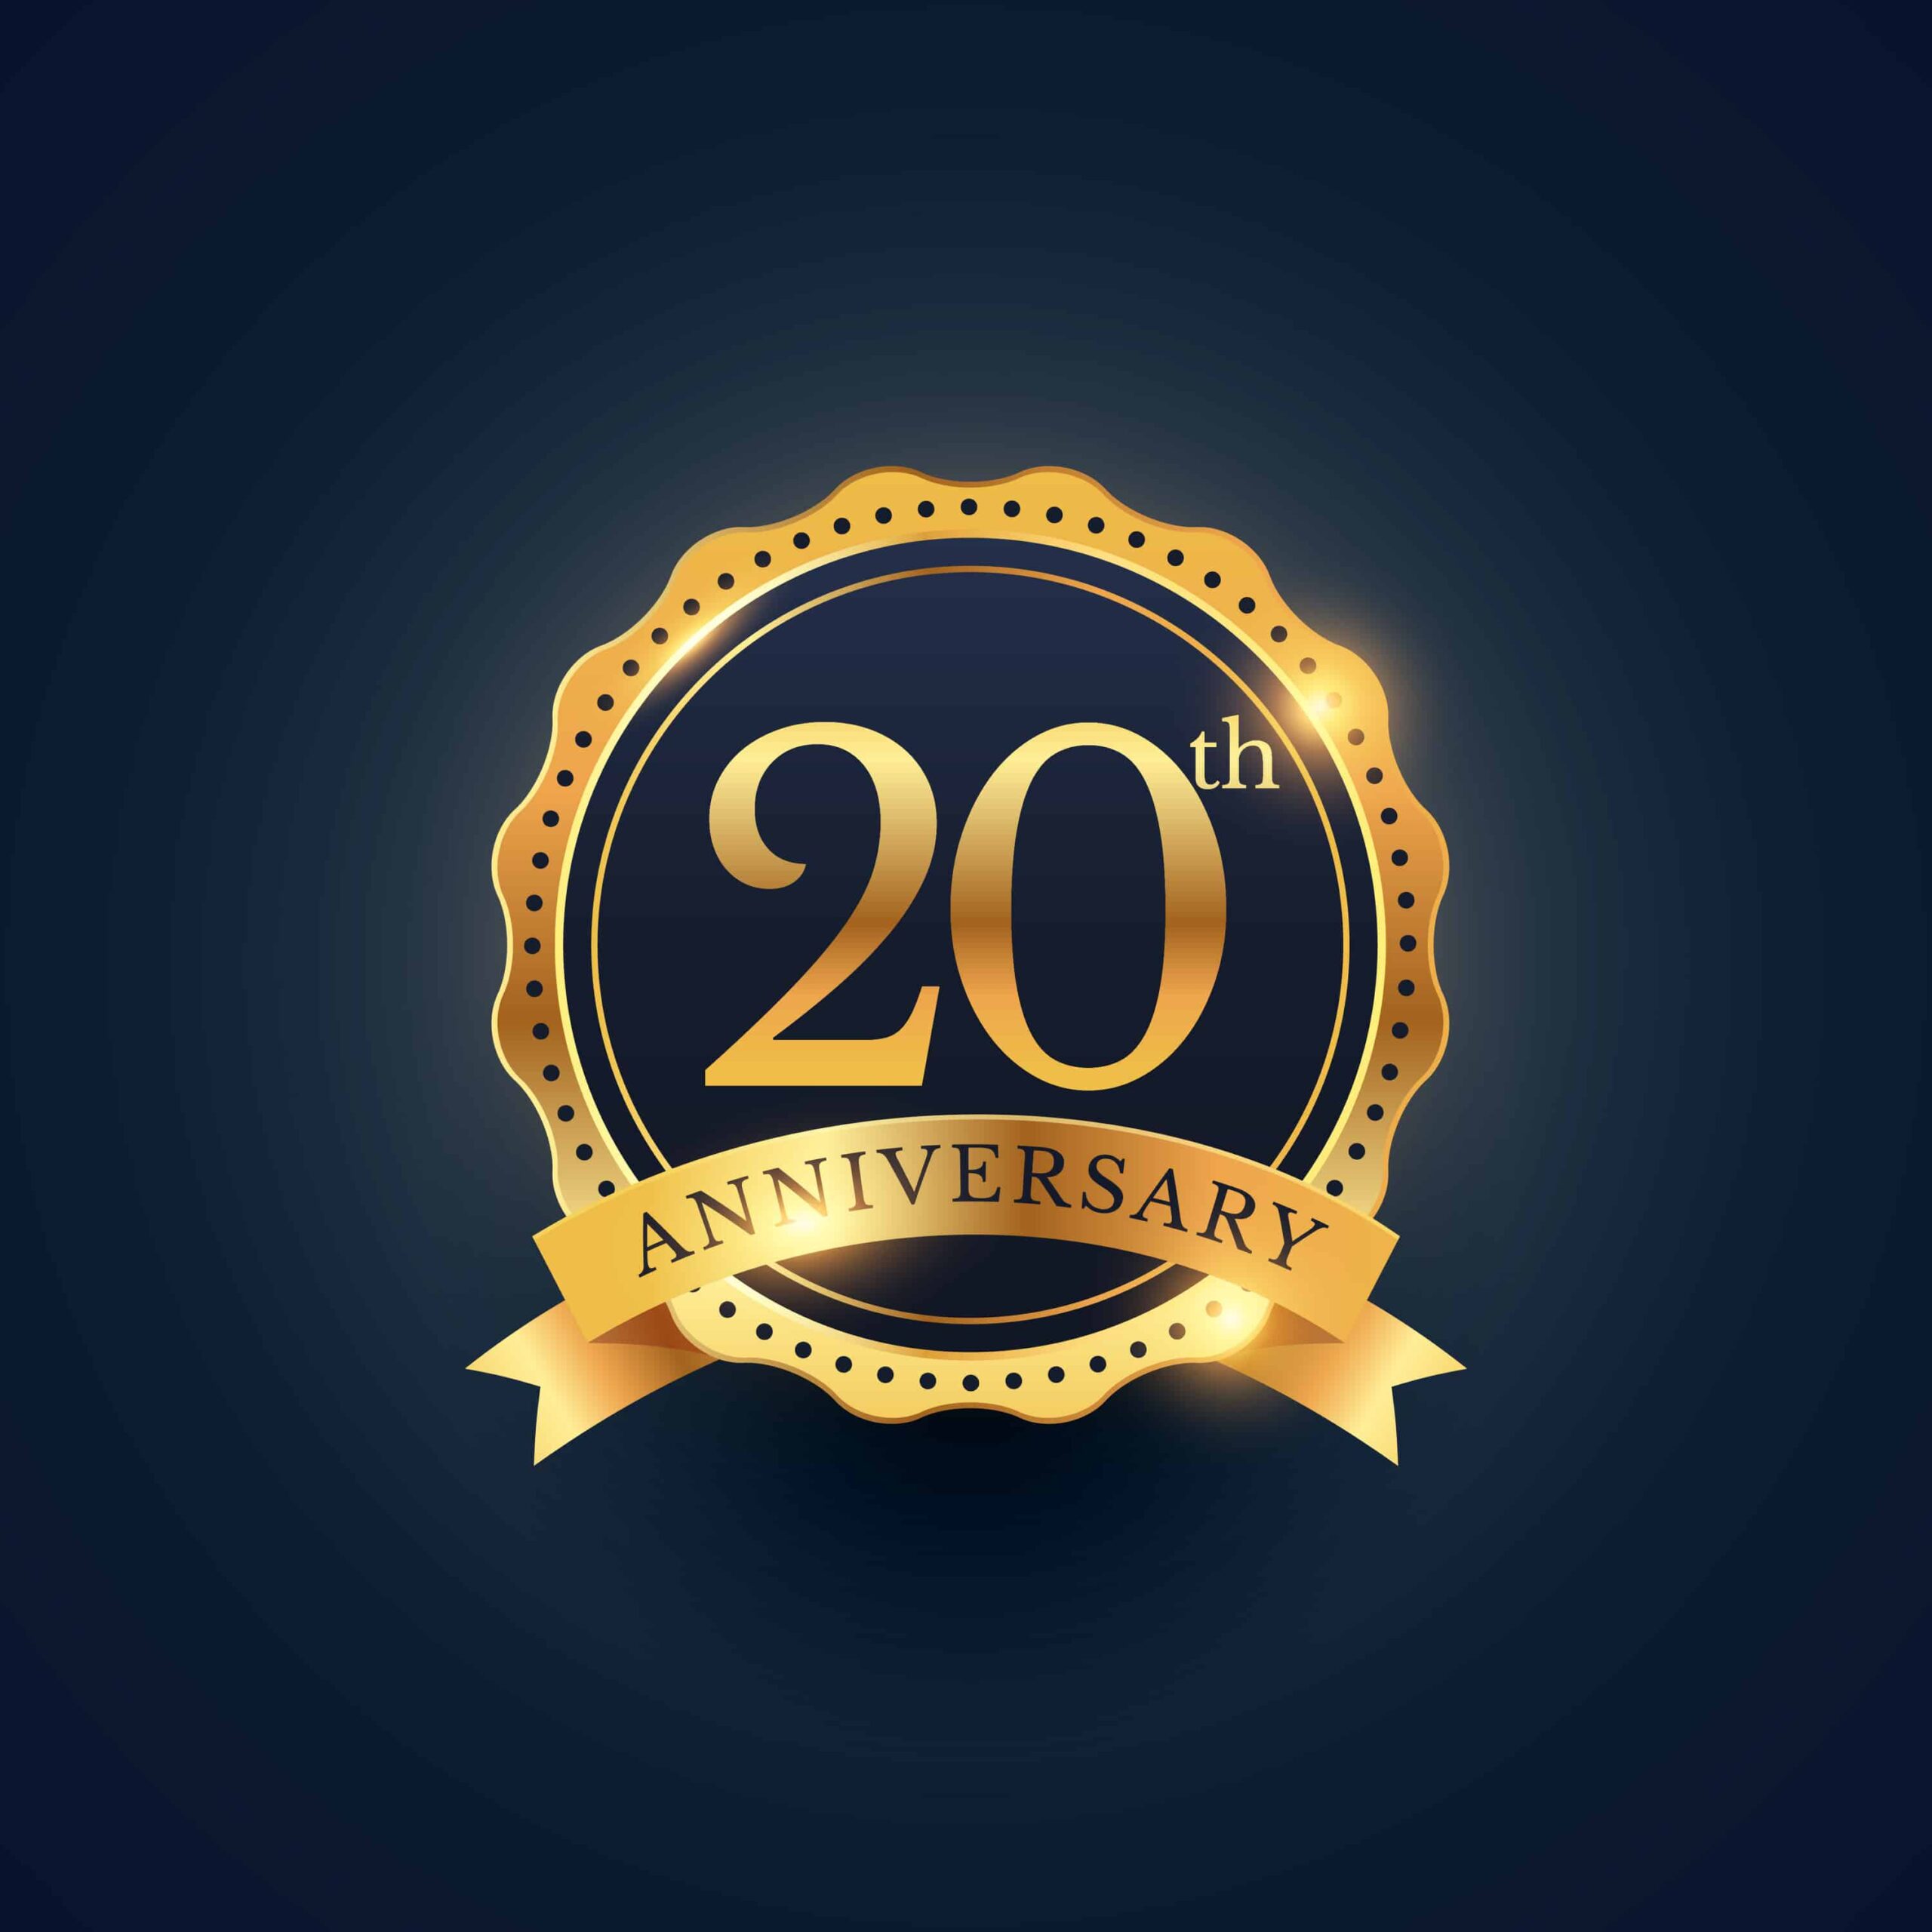 20th anniversary announcement badge for Waismann Method celebrating 20 years of providing rapid detox and medical detox for opioid use disorder and alcohol dependence